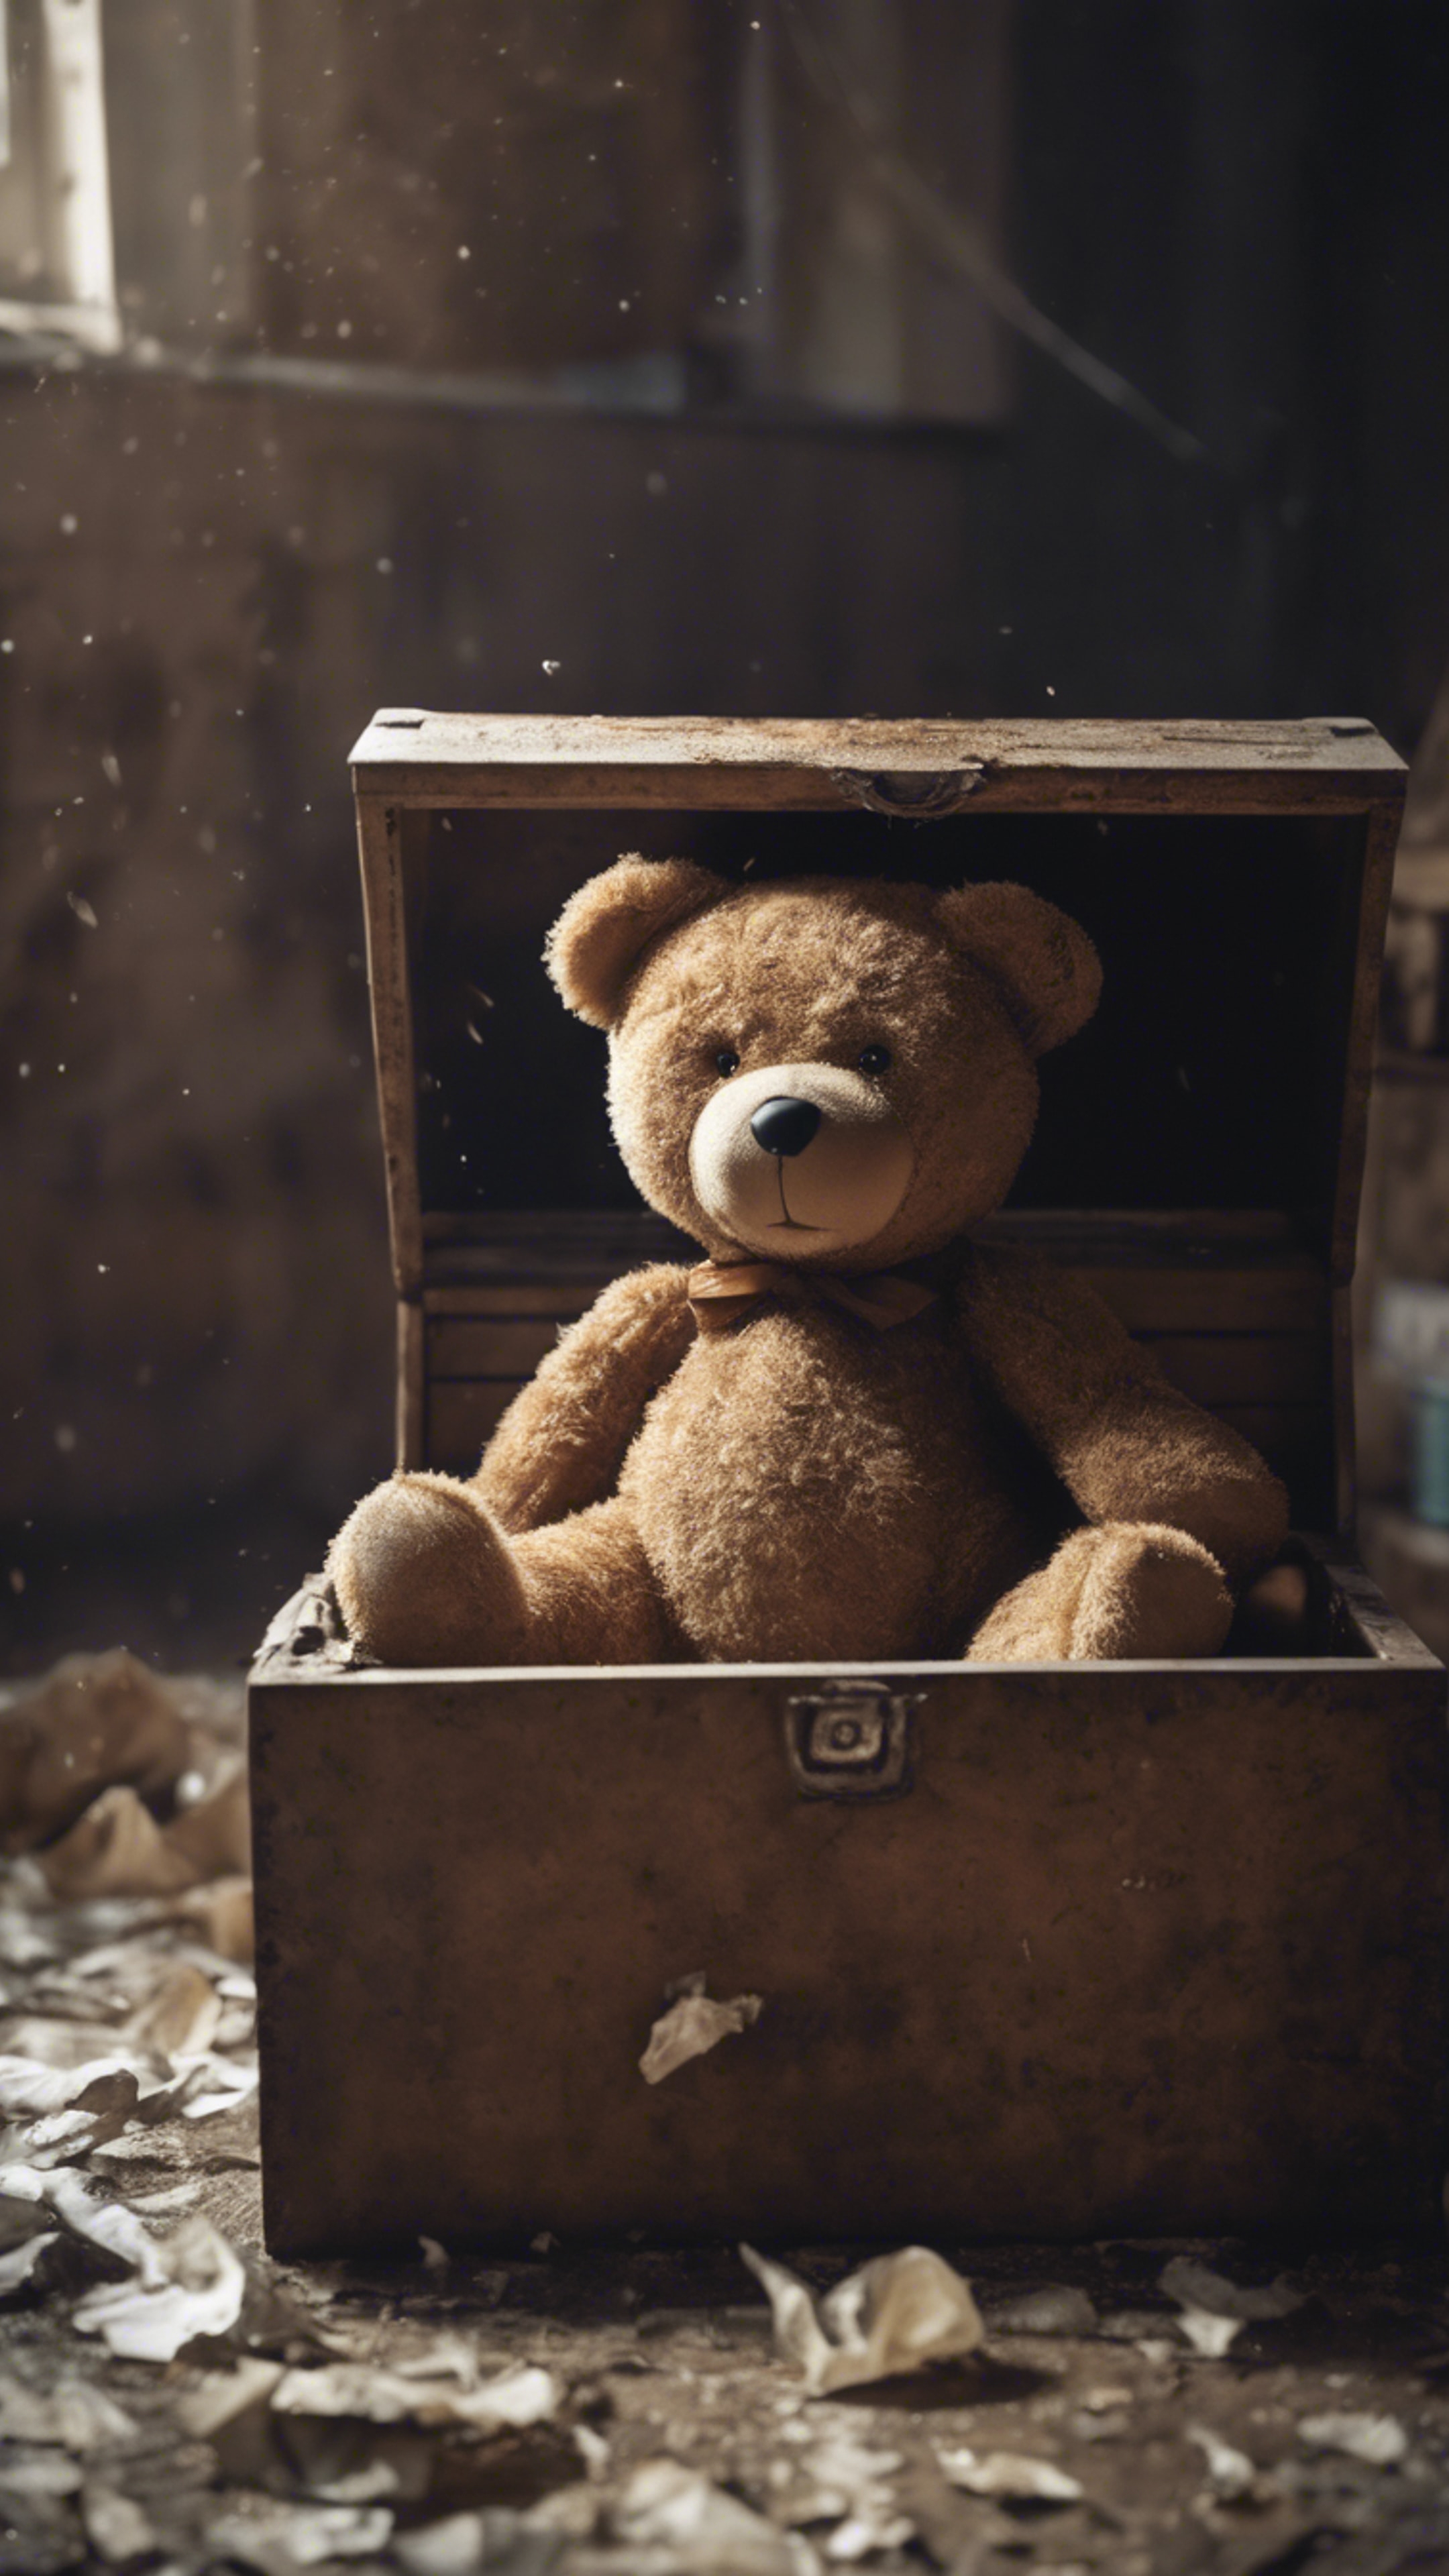 A haunted teddy bear lying in a forgotten toy box, a tear-stained face staring blankly at the ceiling. Hintergrund[ba9bf5e8e31a4c05a94a]